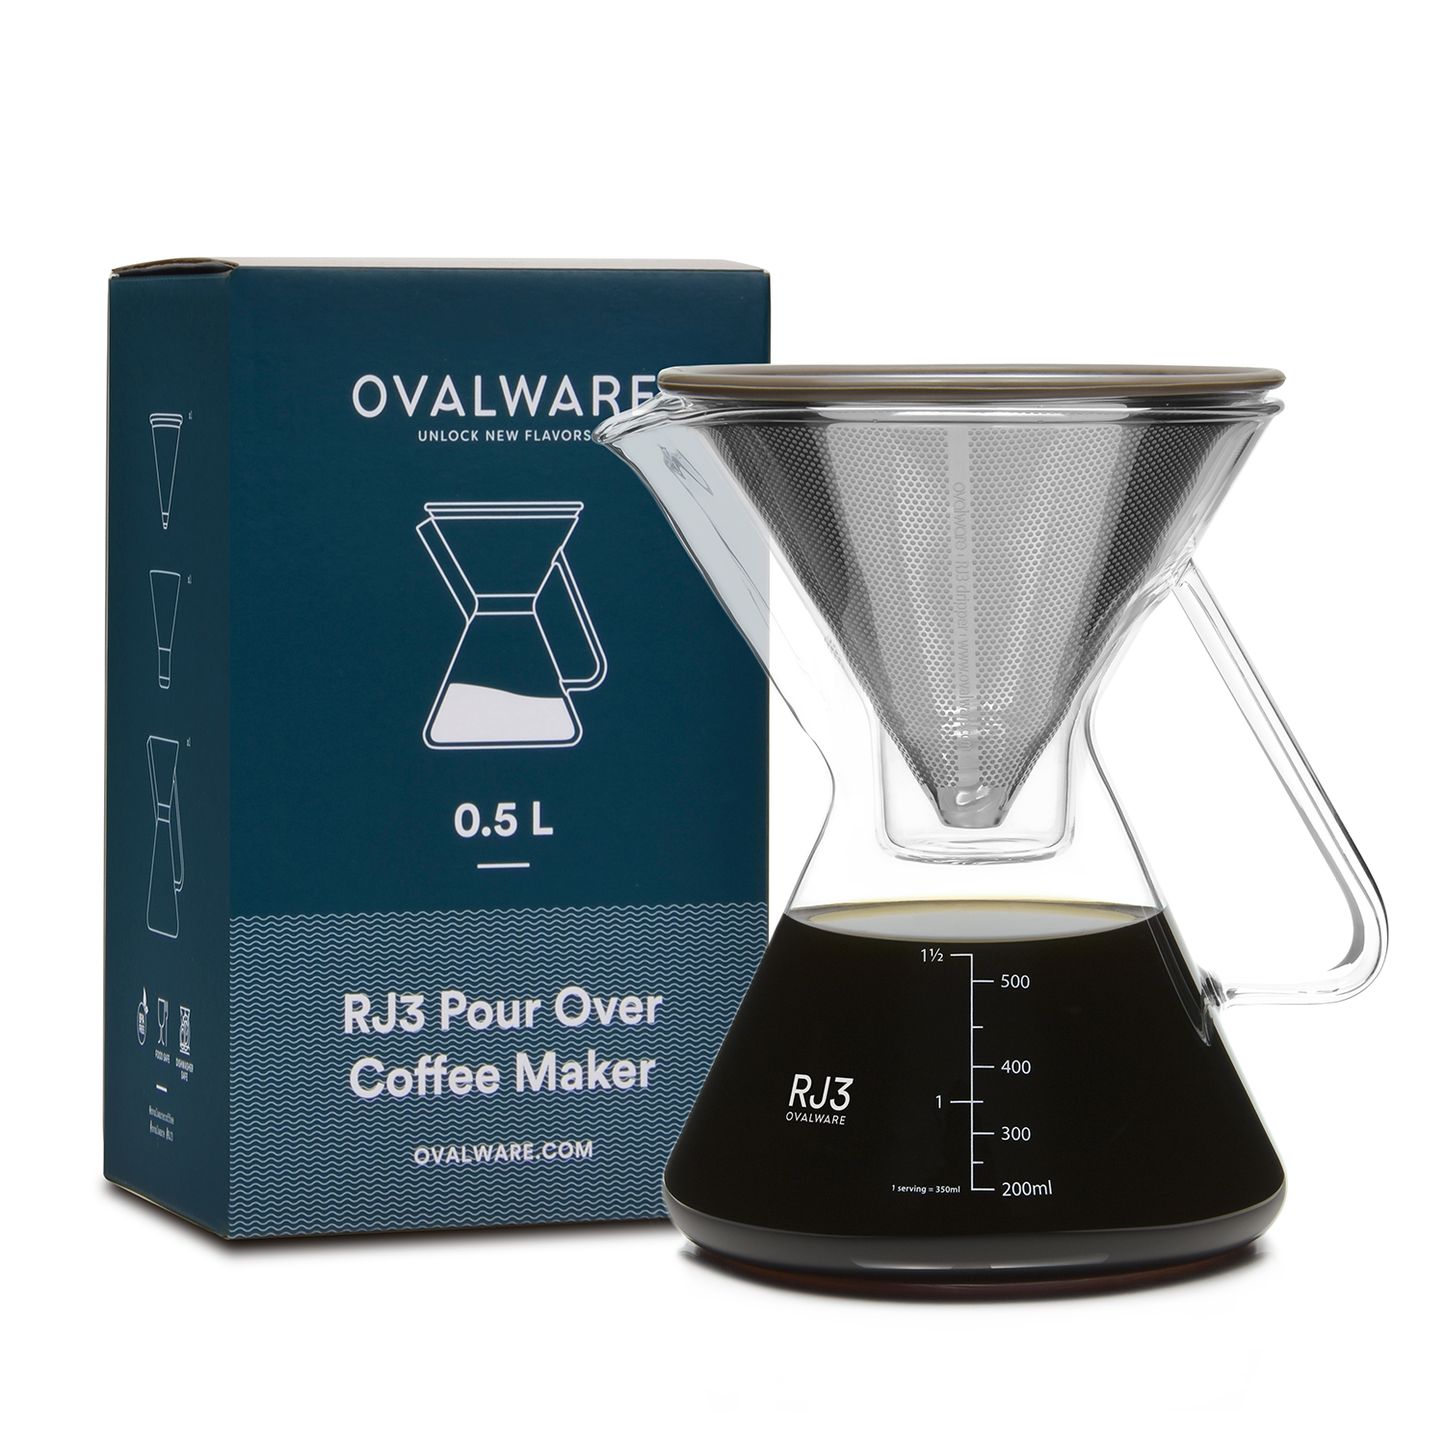 RJ3 Pour Over Coffee Maker with Filter